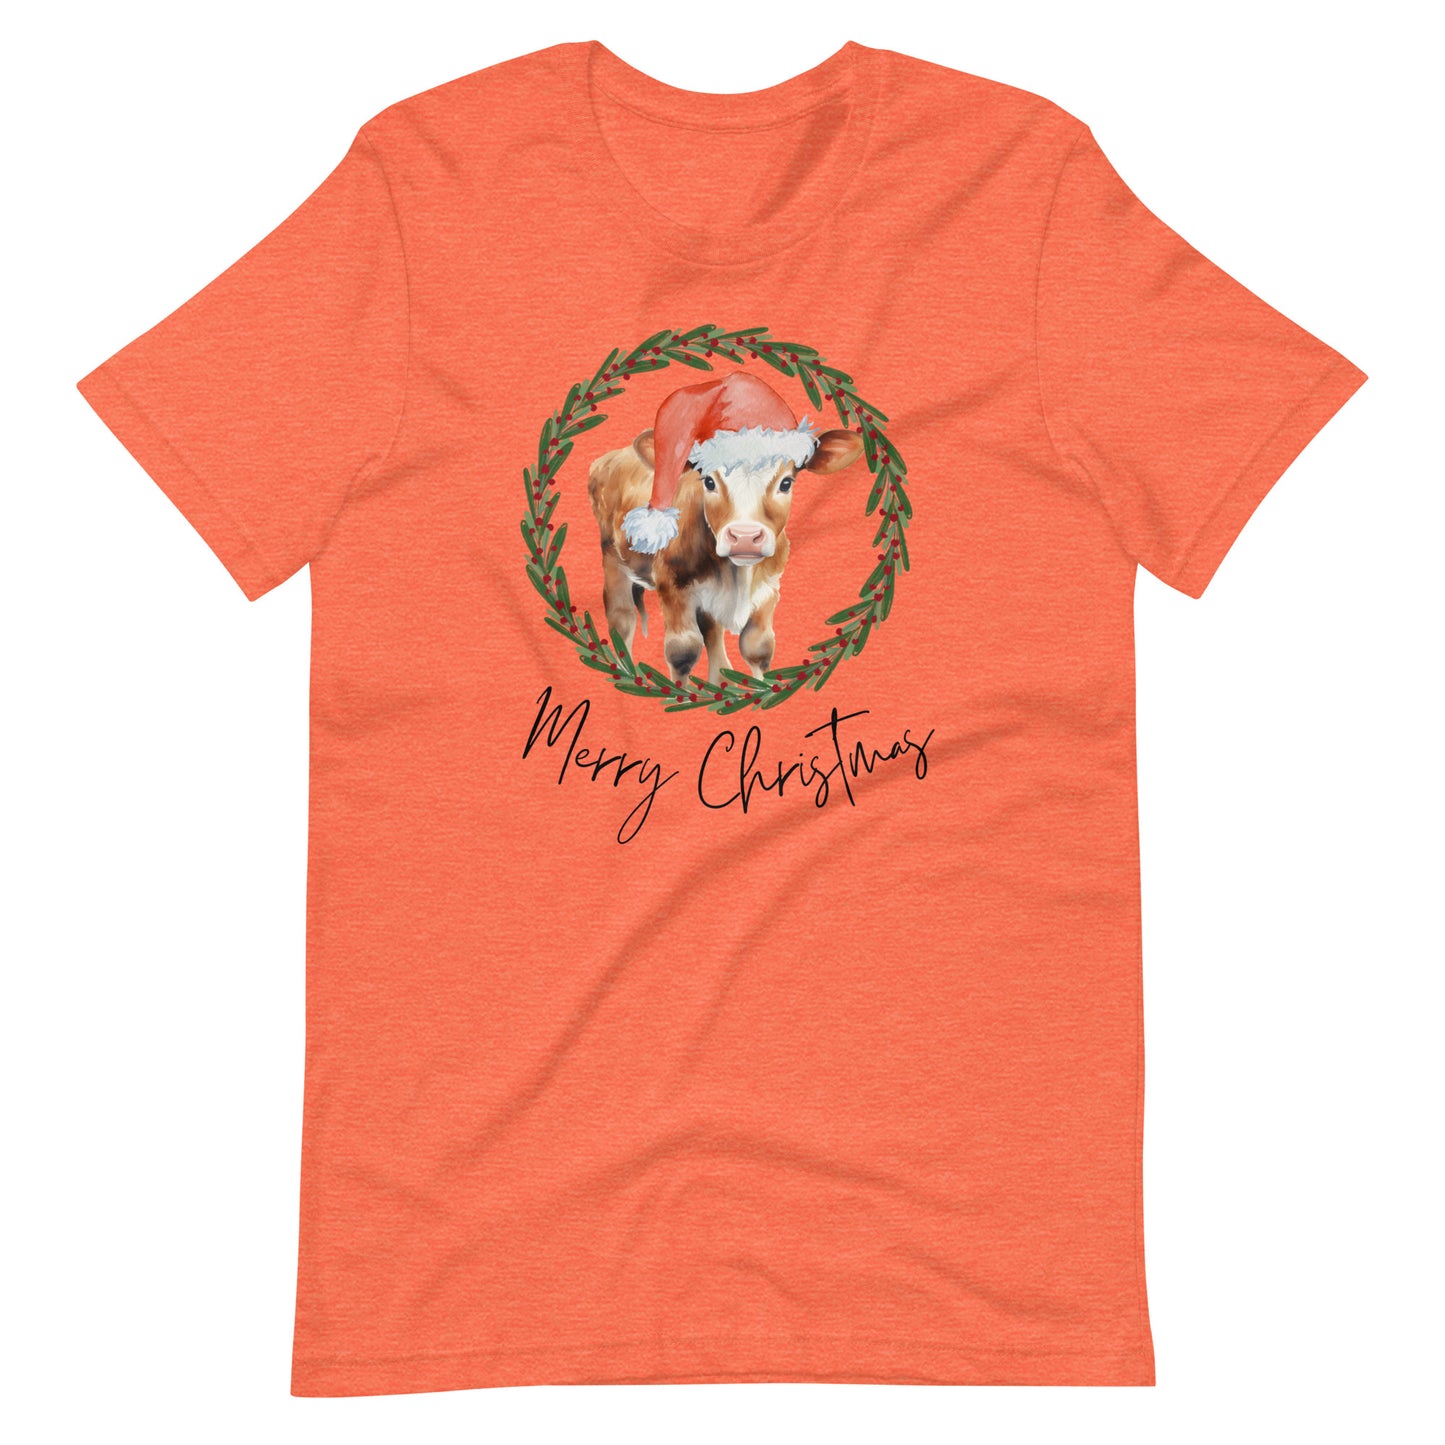 Merry Christmas Baby Cow Unisex T-Shirt